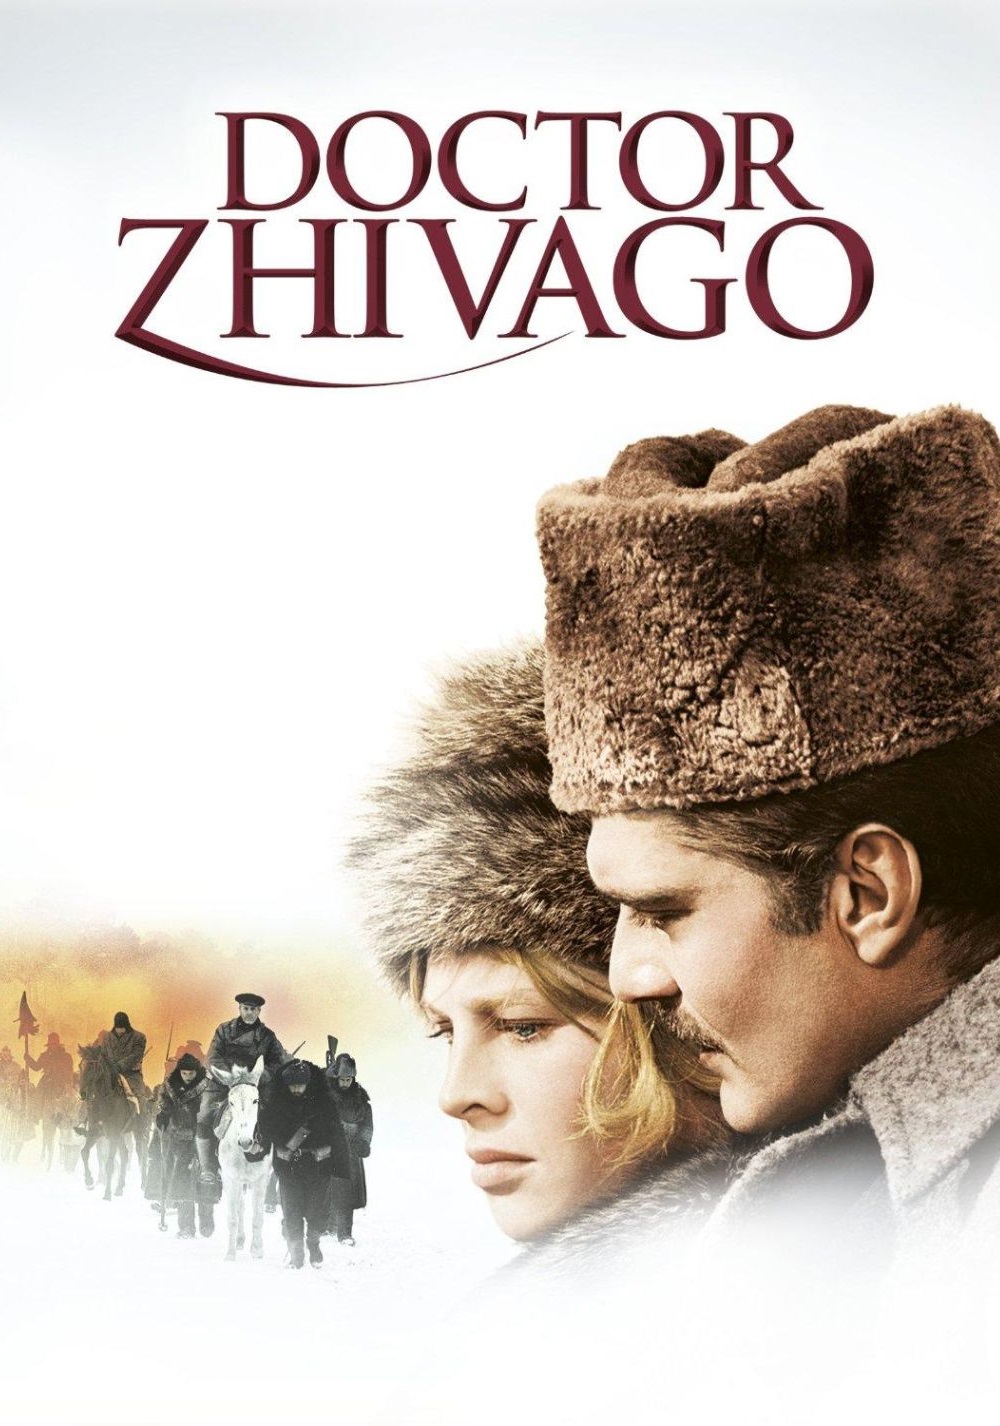 summary of the book dr zhivago